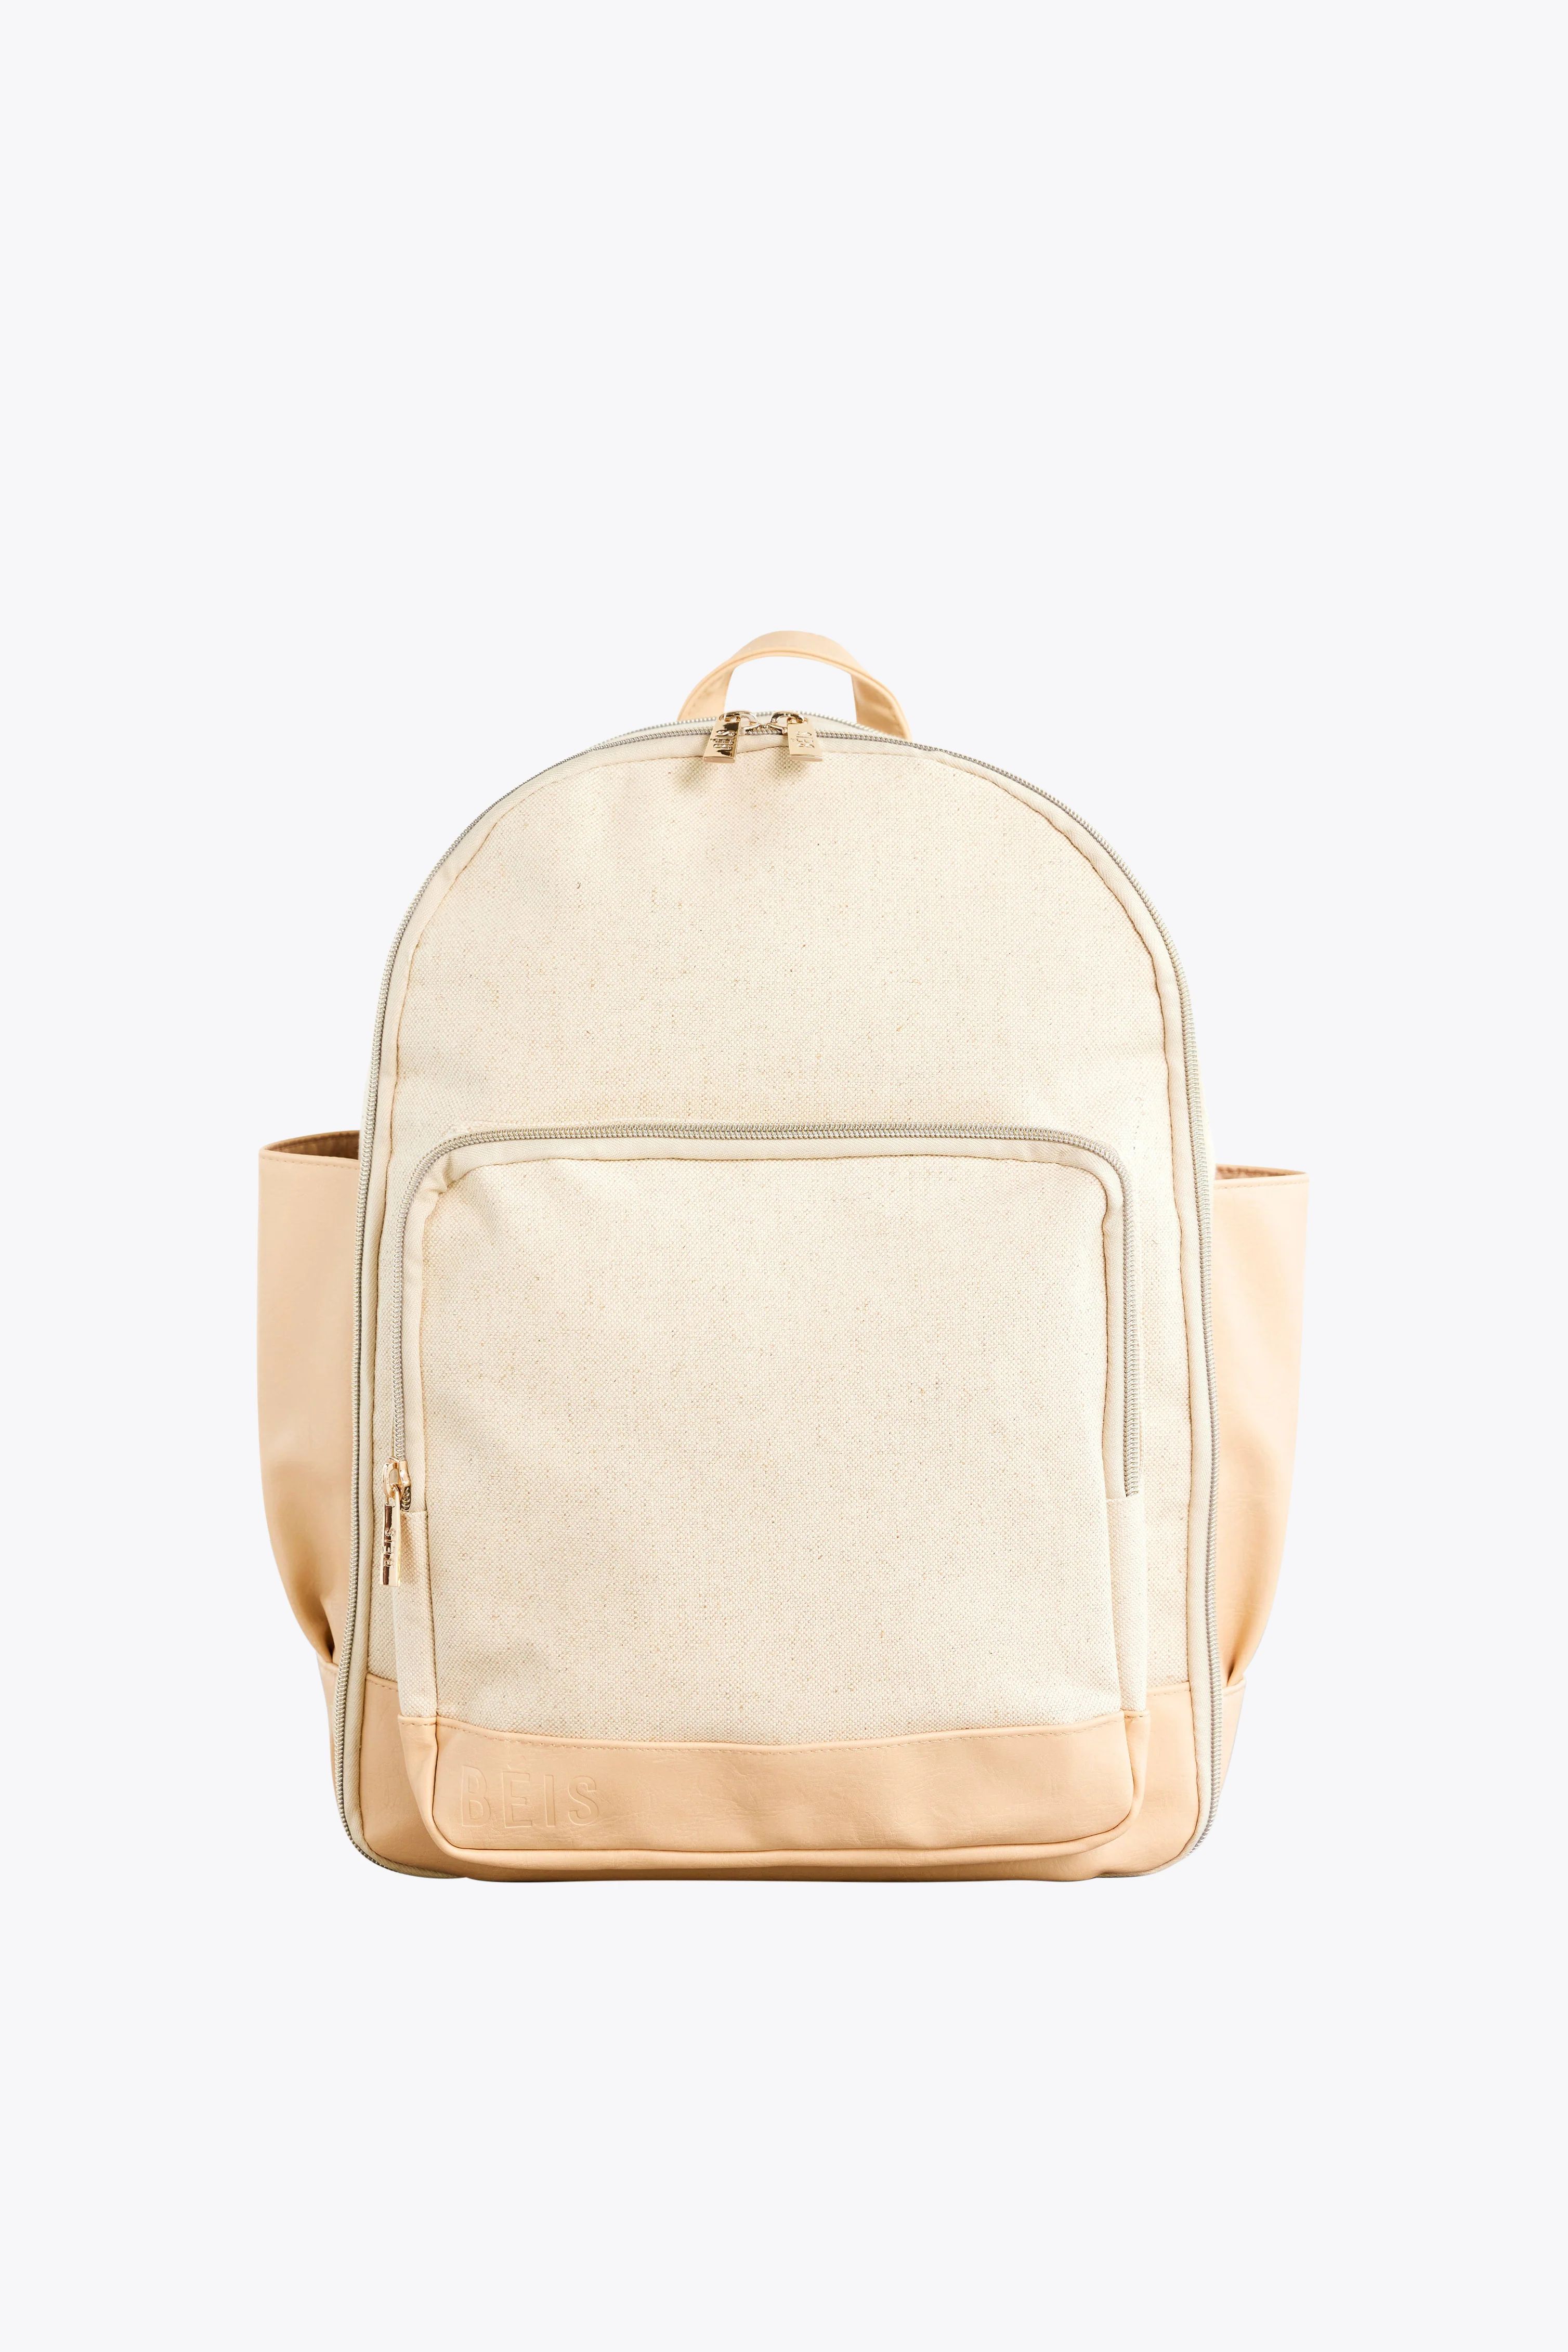 The Backpack in Beige | BÉIS Travel